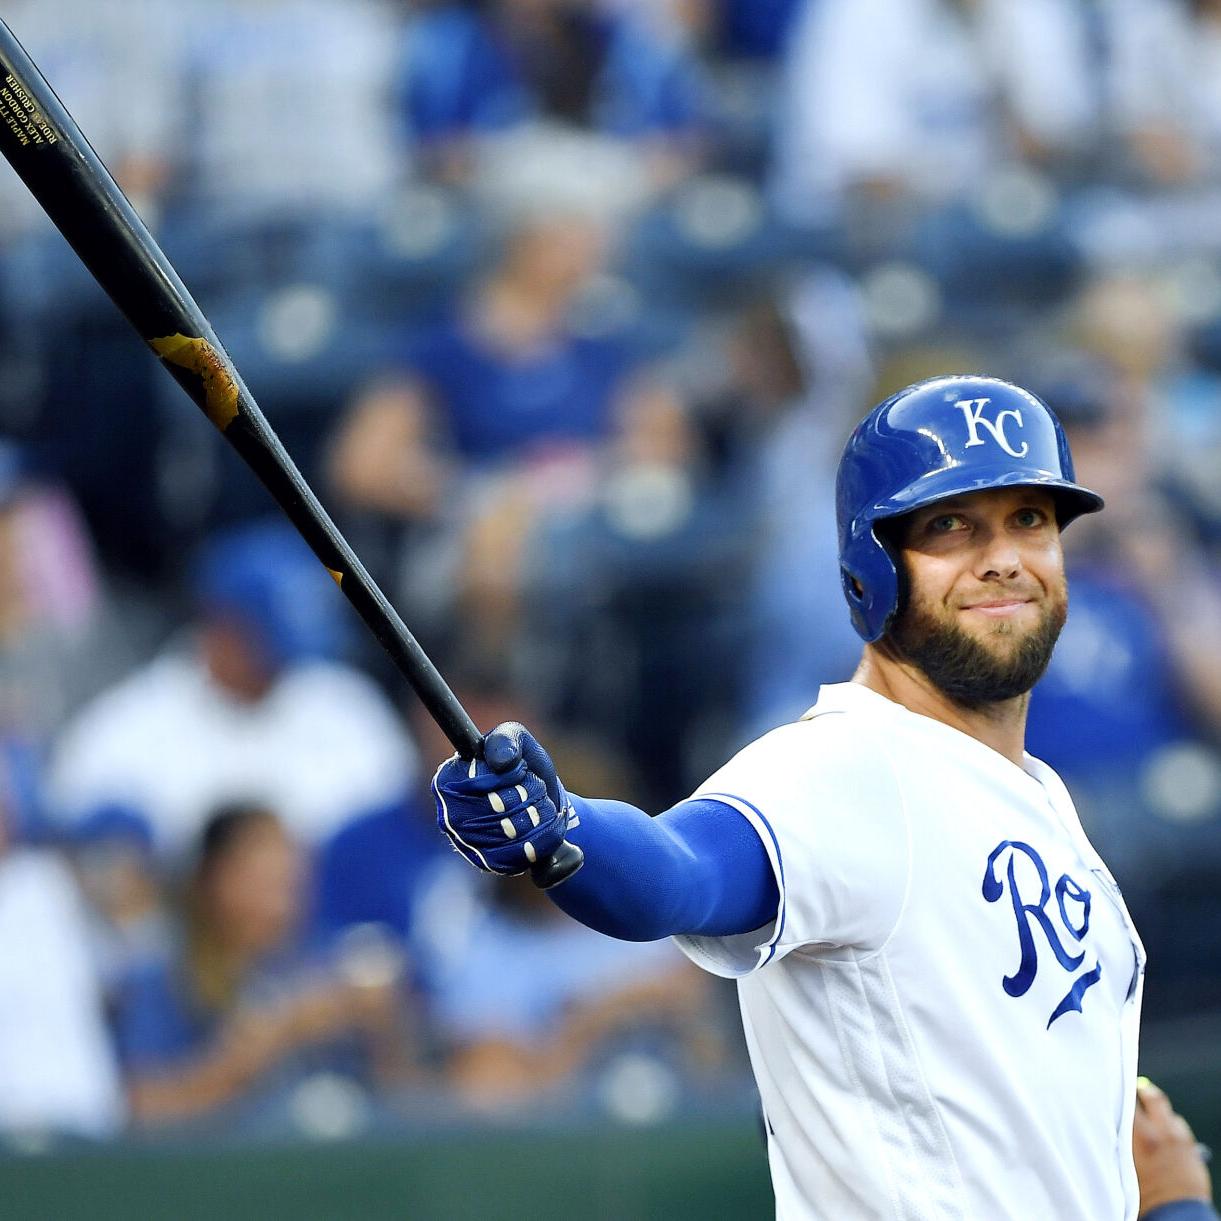 Alex Gordon retiring after playing entire career with Royals - The